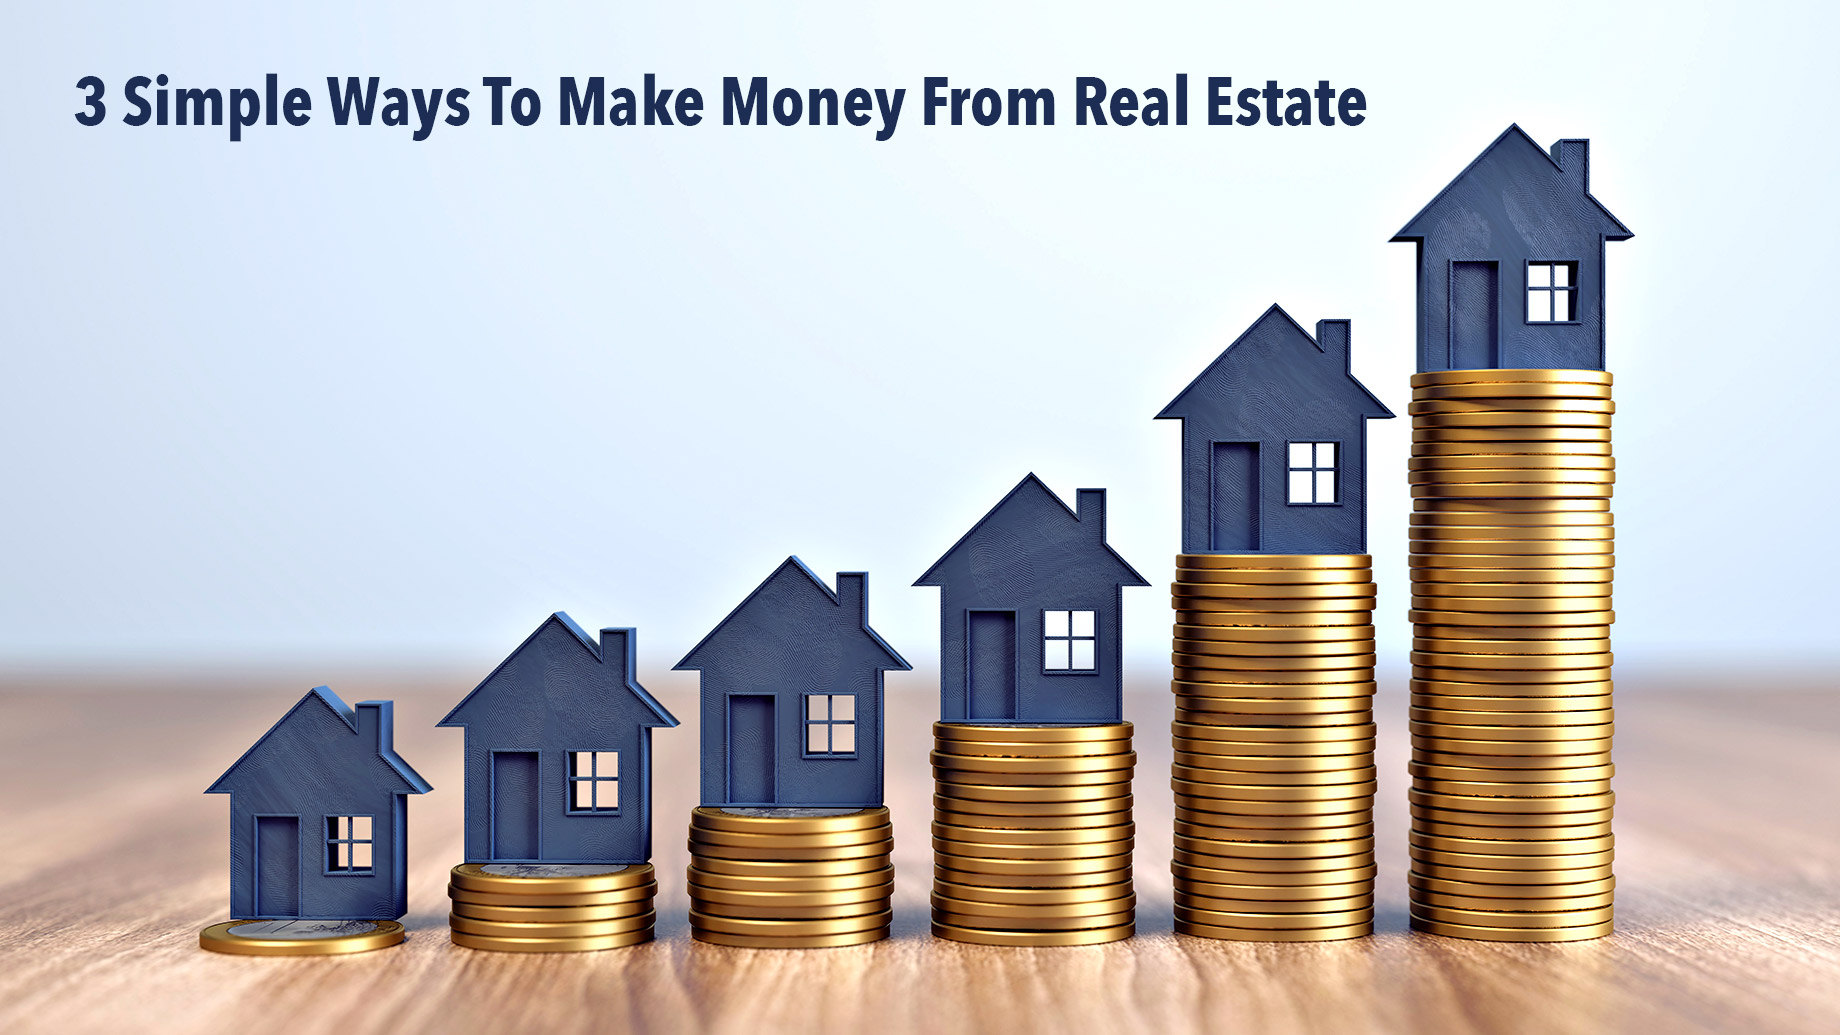 3 Simple Ways To Make Money From Real Estate